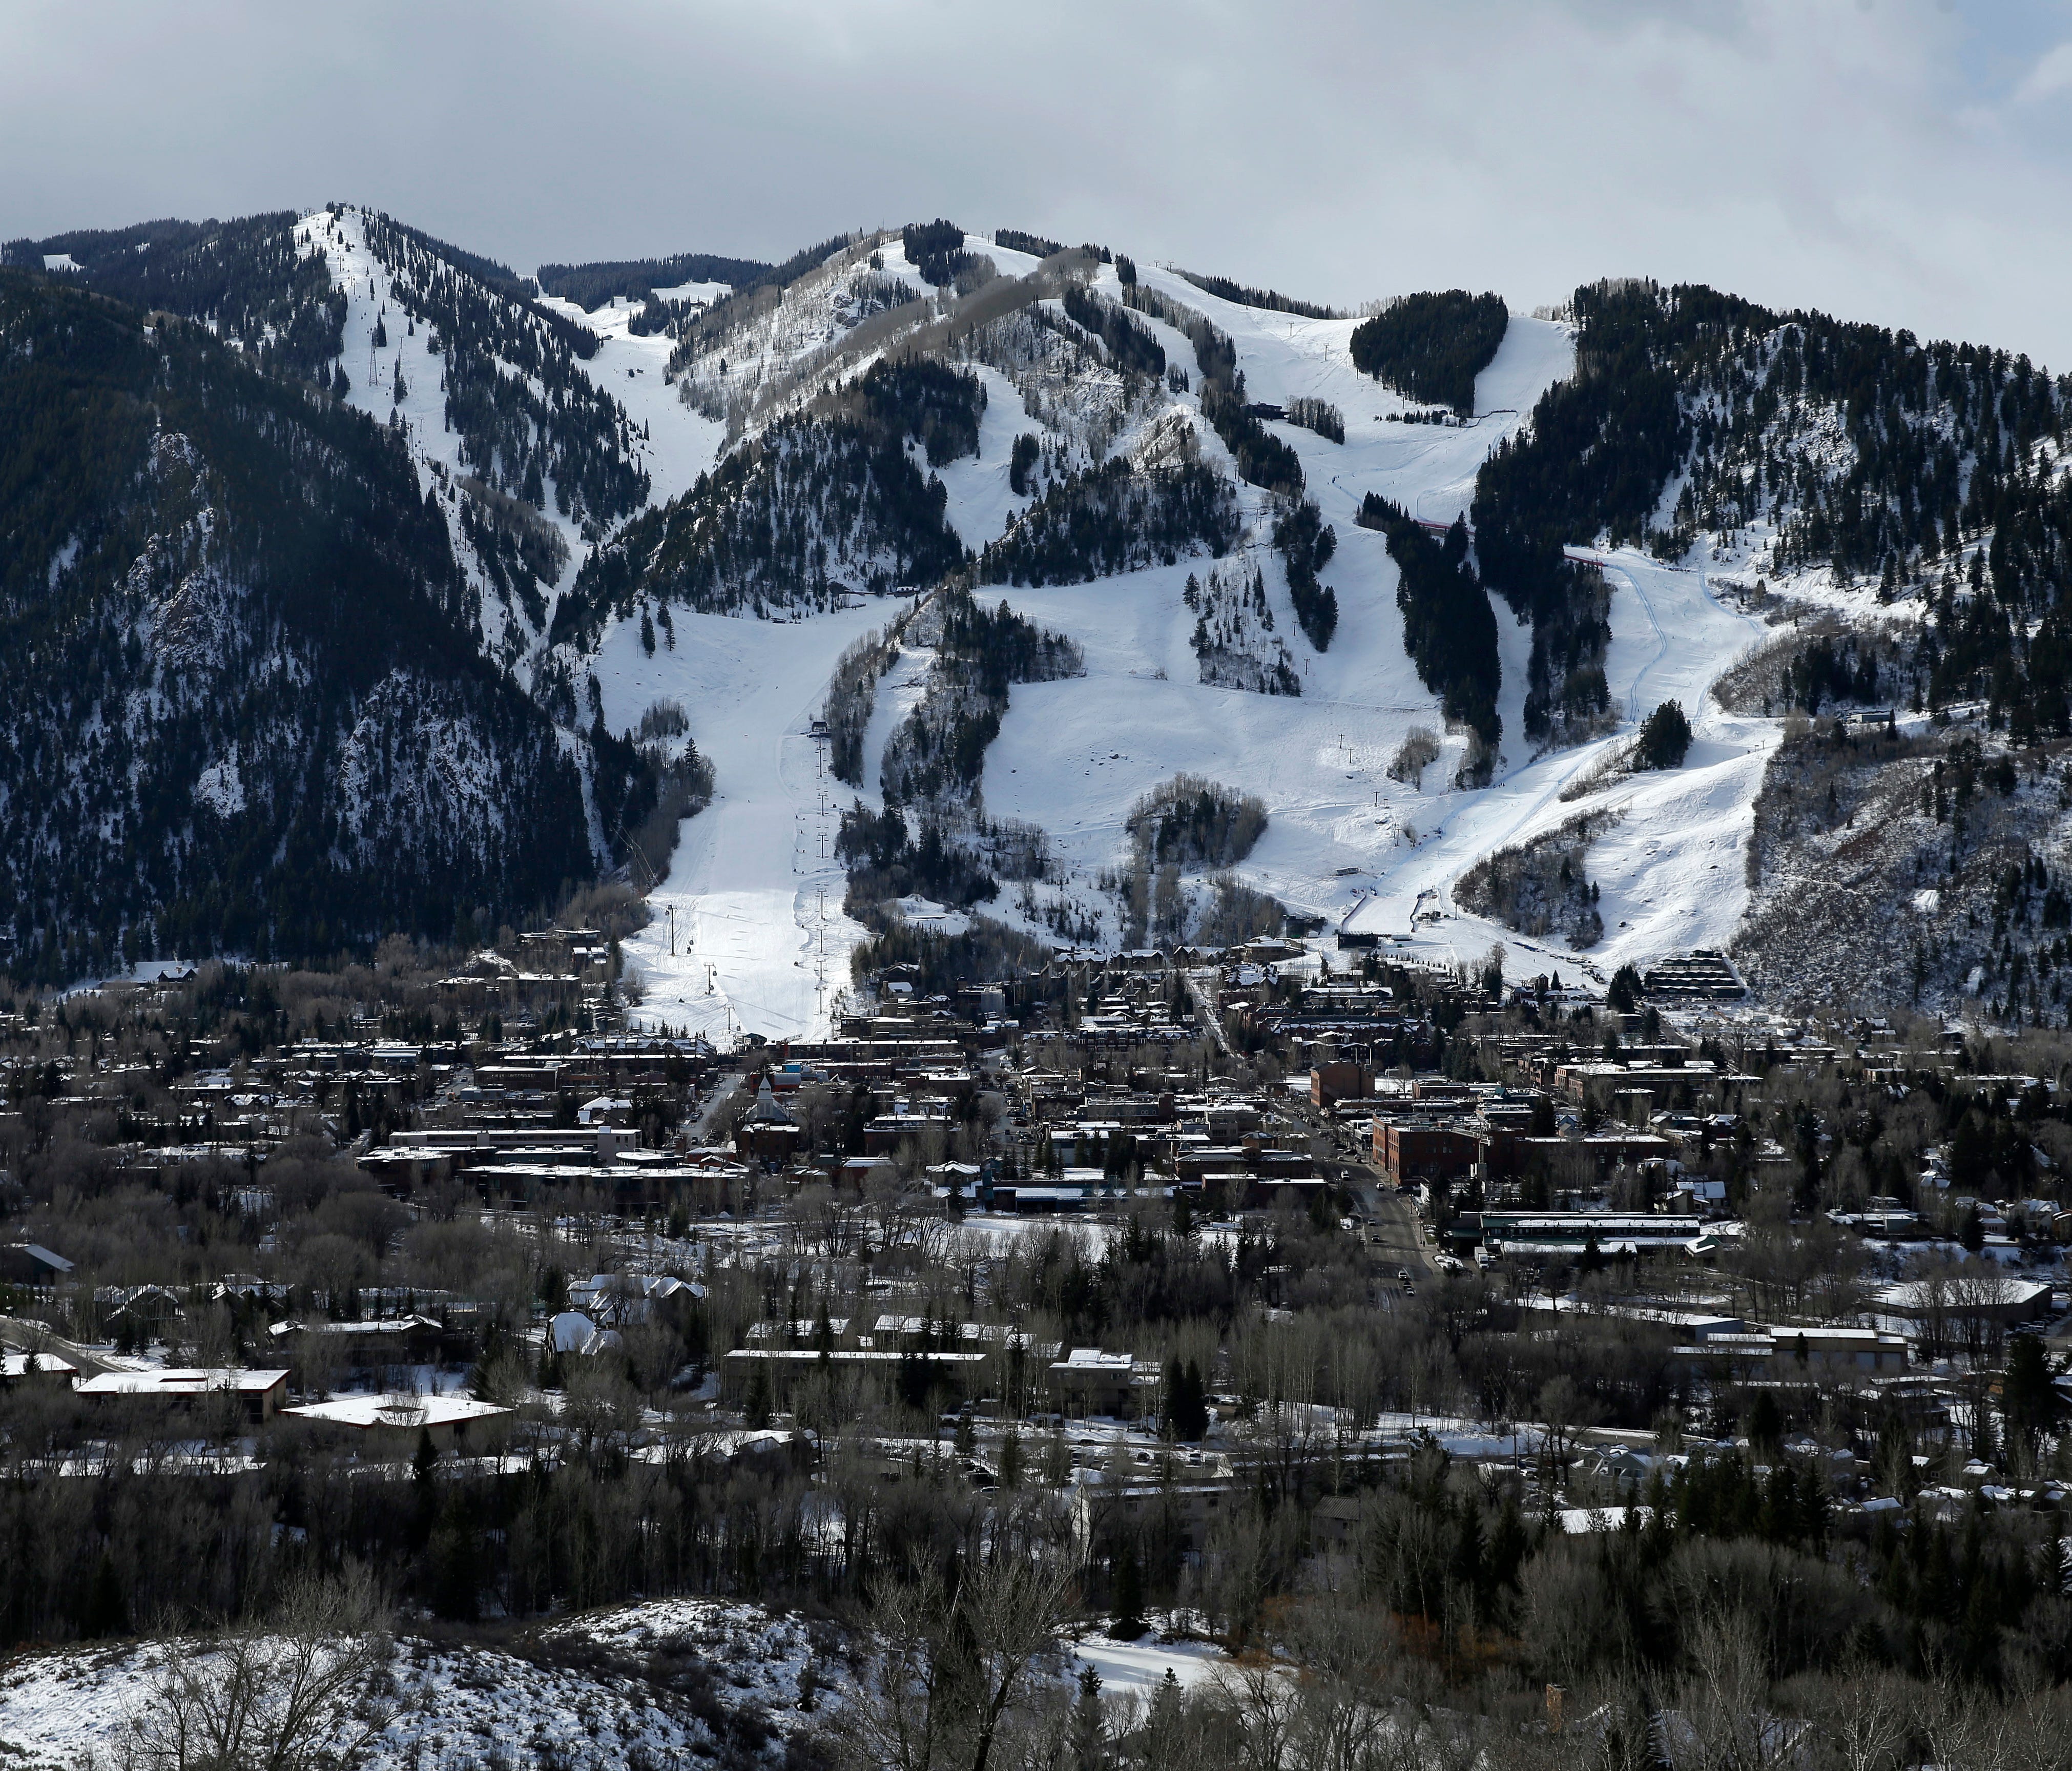 The Aspen Mountain ski area by Aspen, Colo. Aspen Skiing Co., which runs the four Aspen-area ski resorts, has paid $1.5 billion to buy Intrawest, a conglomeration of ski resorts headlined by Steamboat and Winter Park.